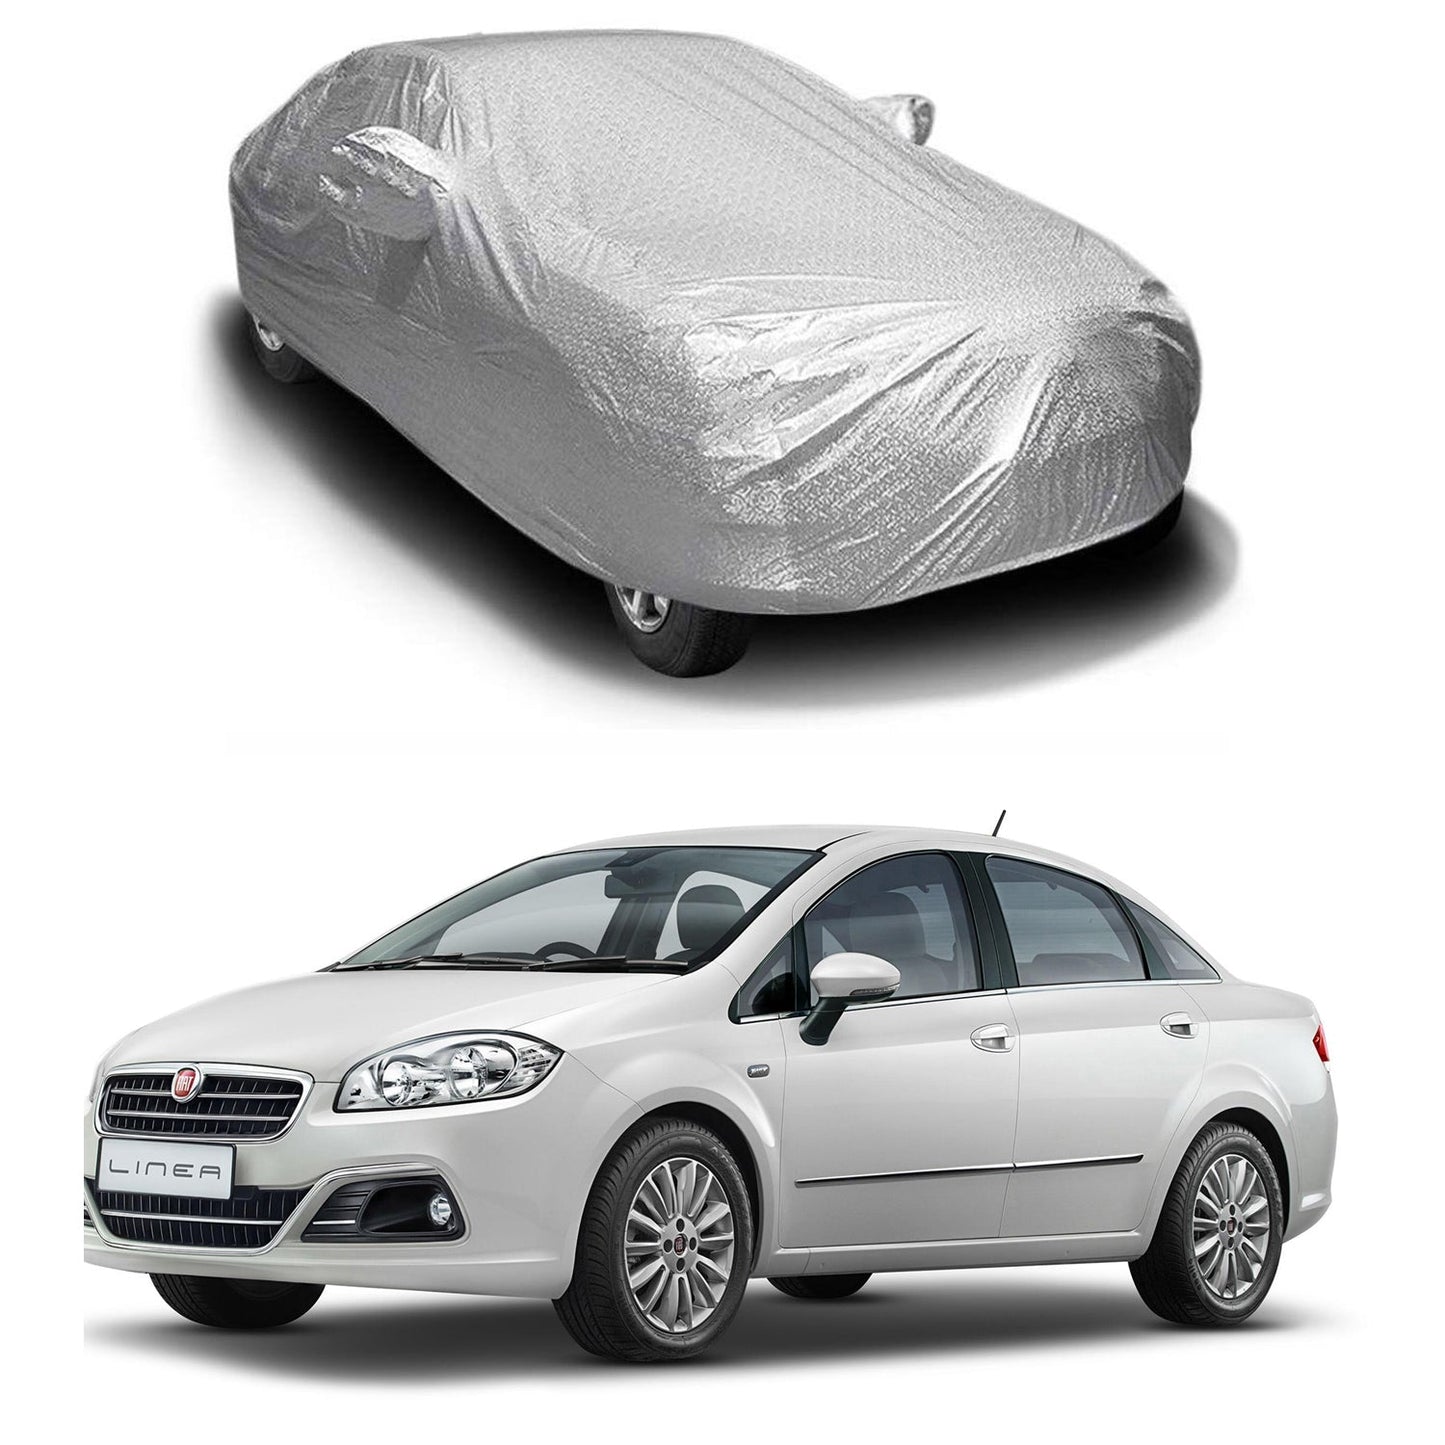 Oshotto Spyro Silver Anti Reflective, dustproof and Water Proof Car Body Cover with Mirror Pockets For Fiat Linea